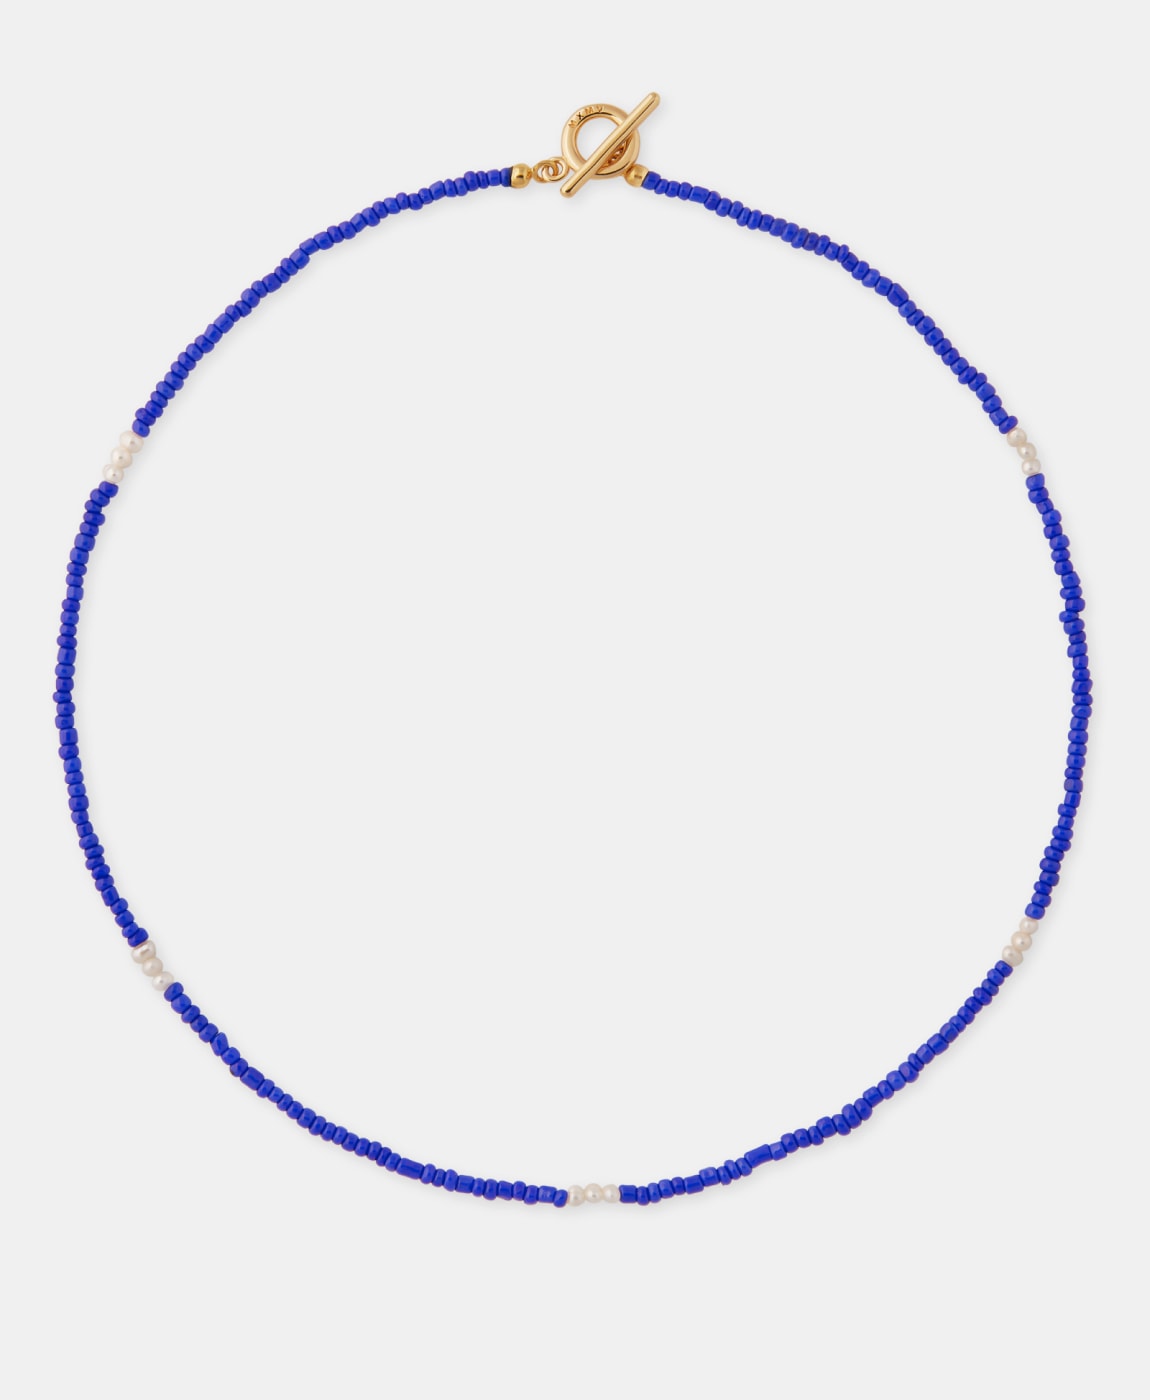 The True Blue Necklace